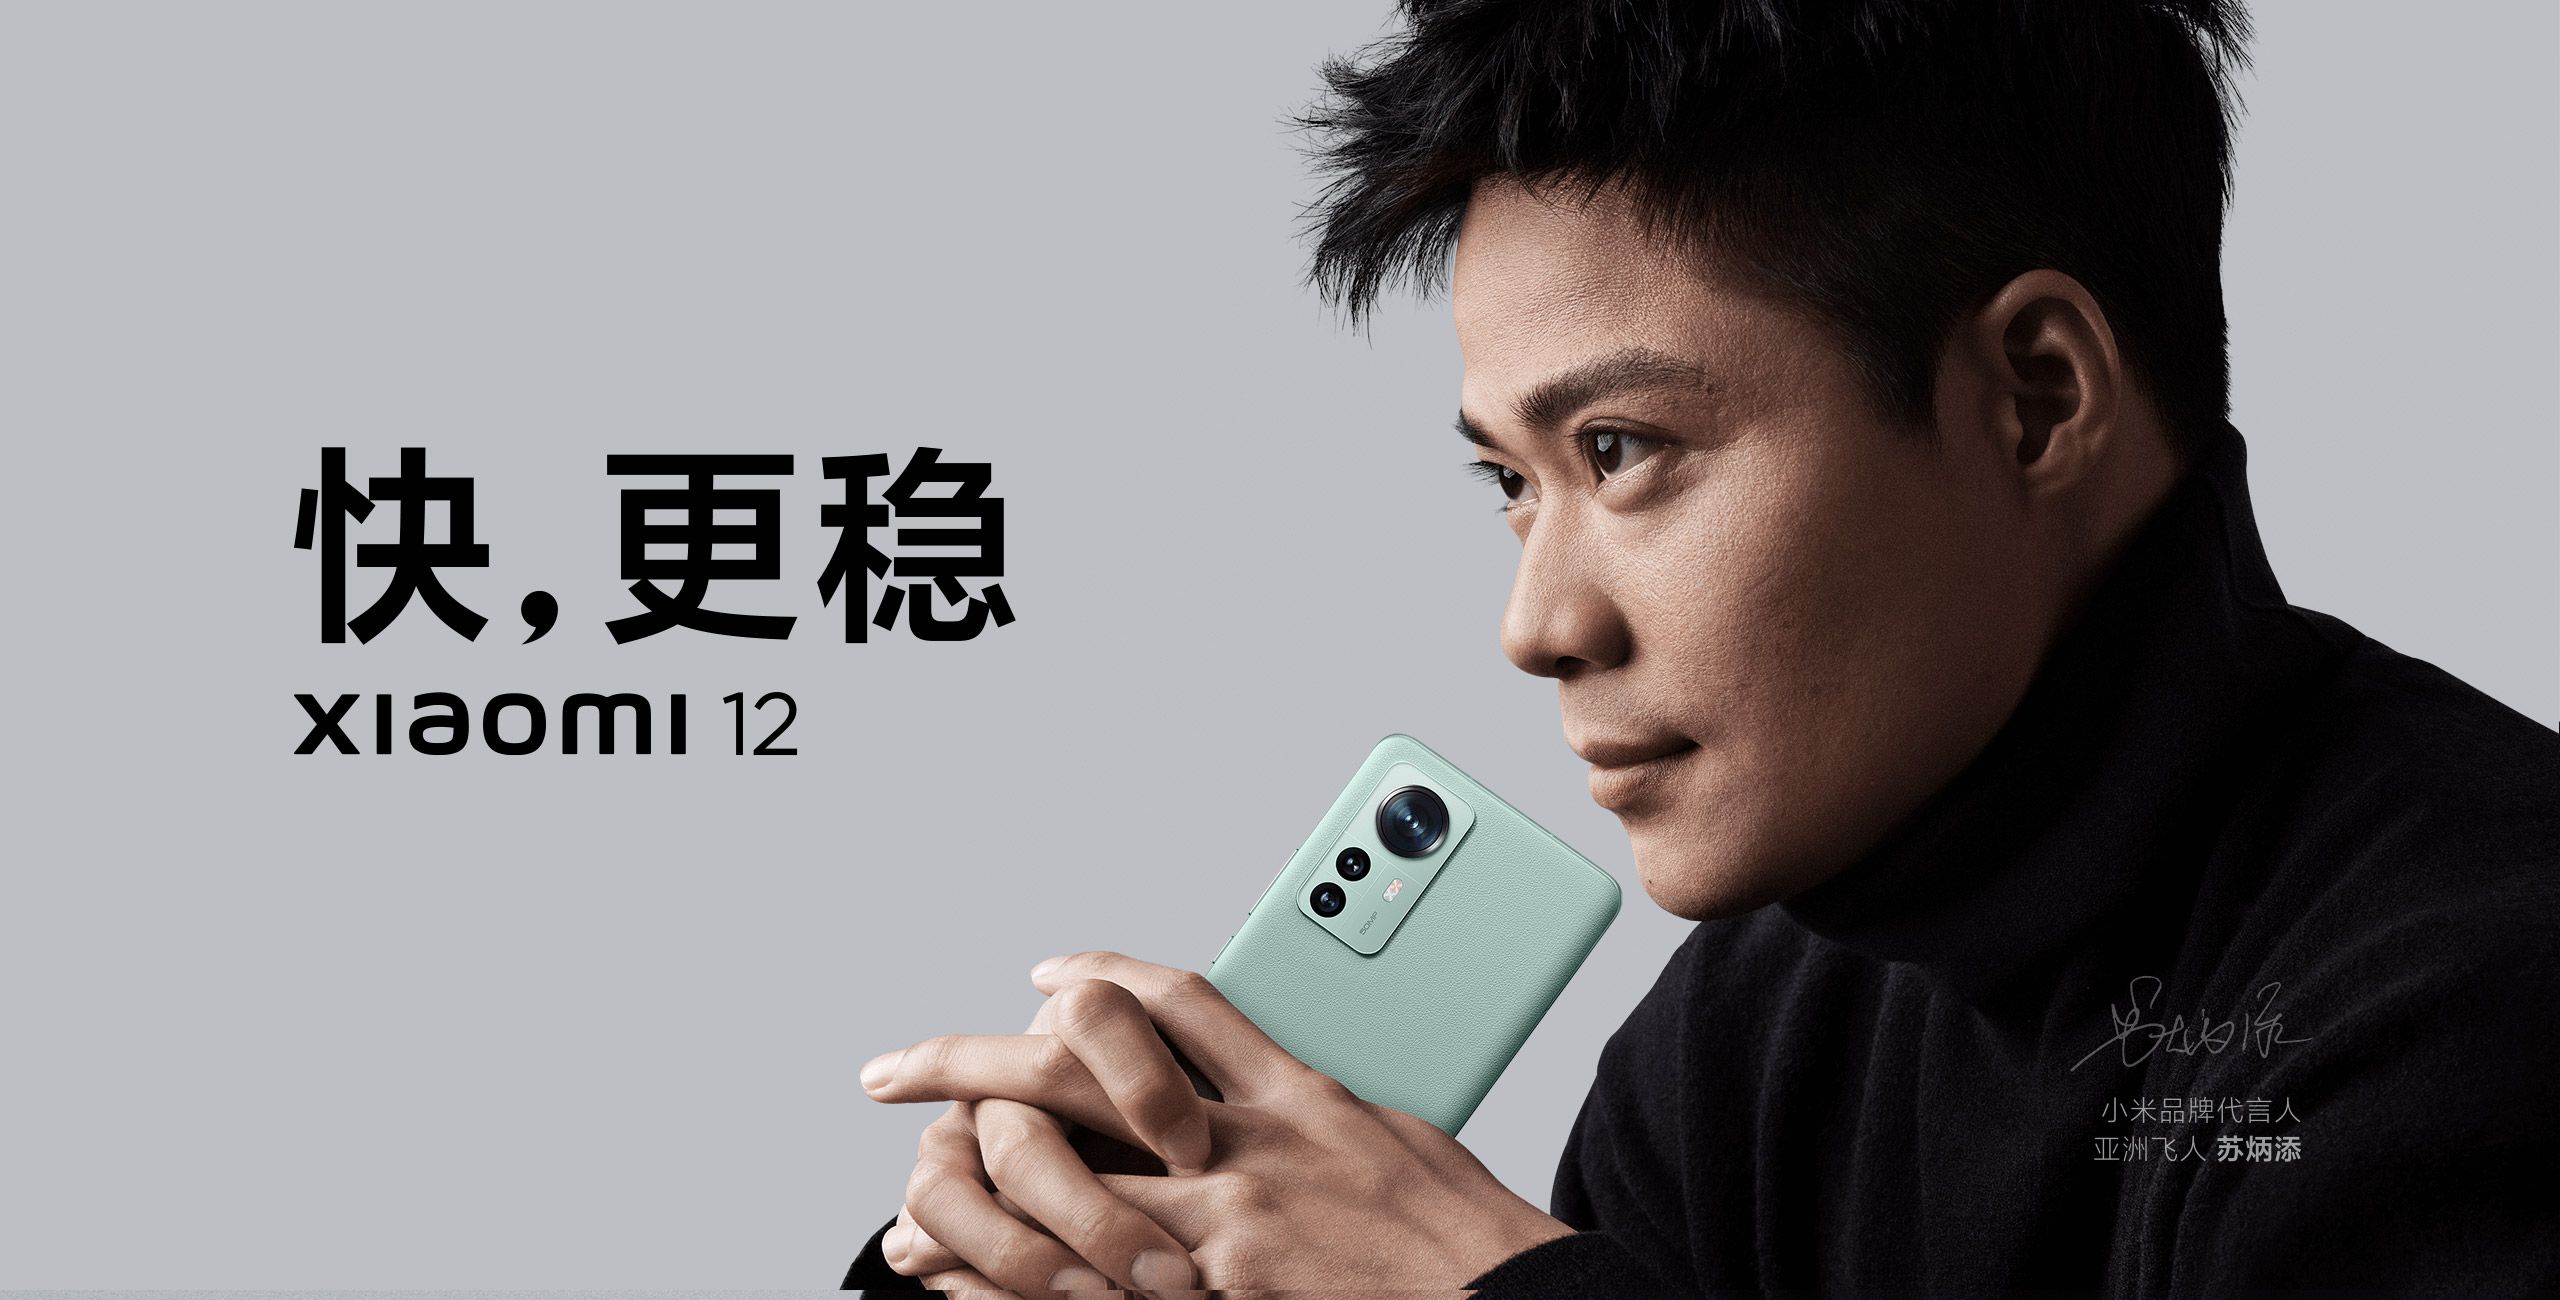 Xiaomi 12 review and price